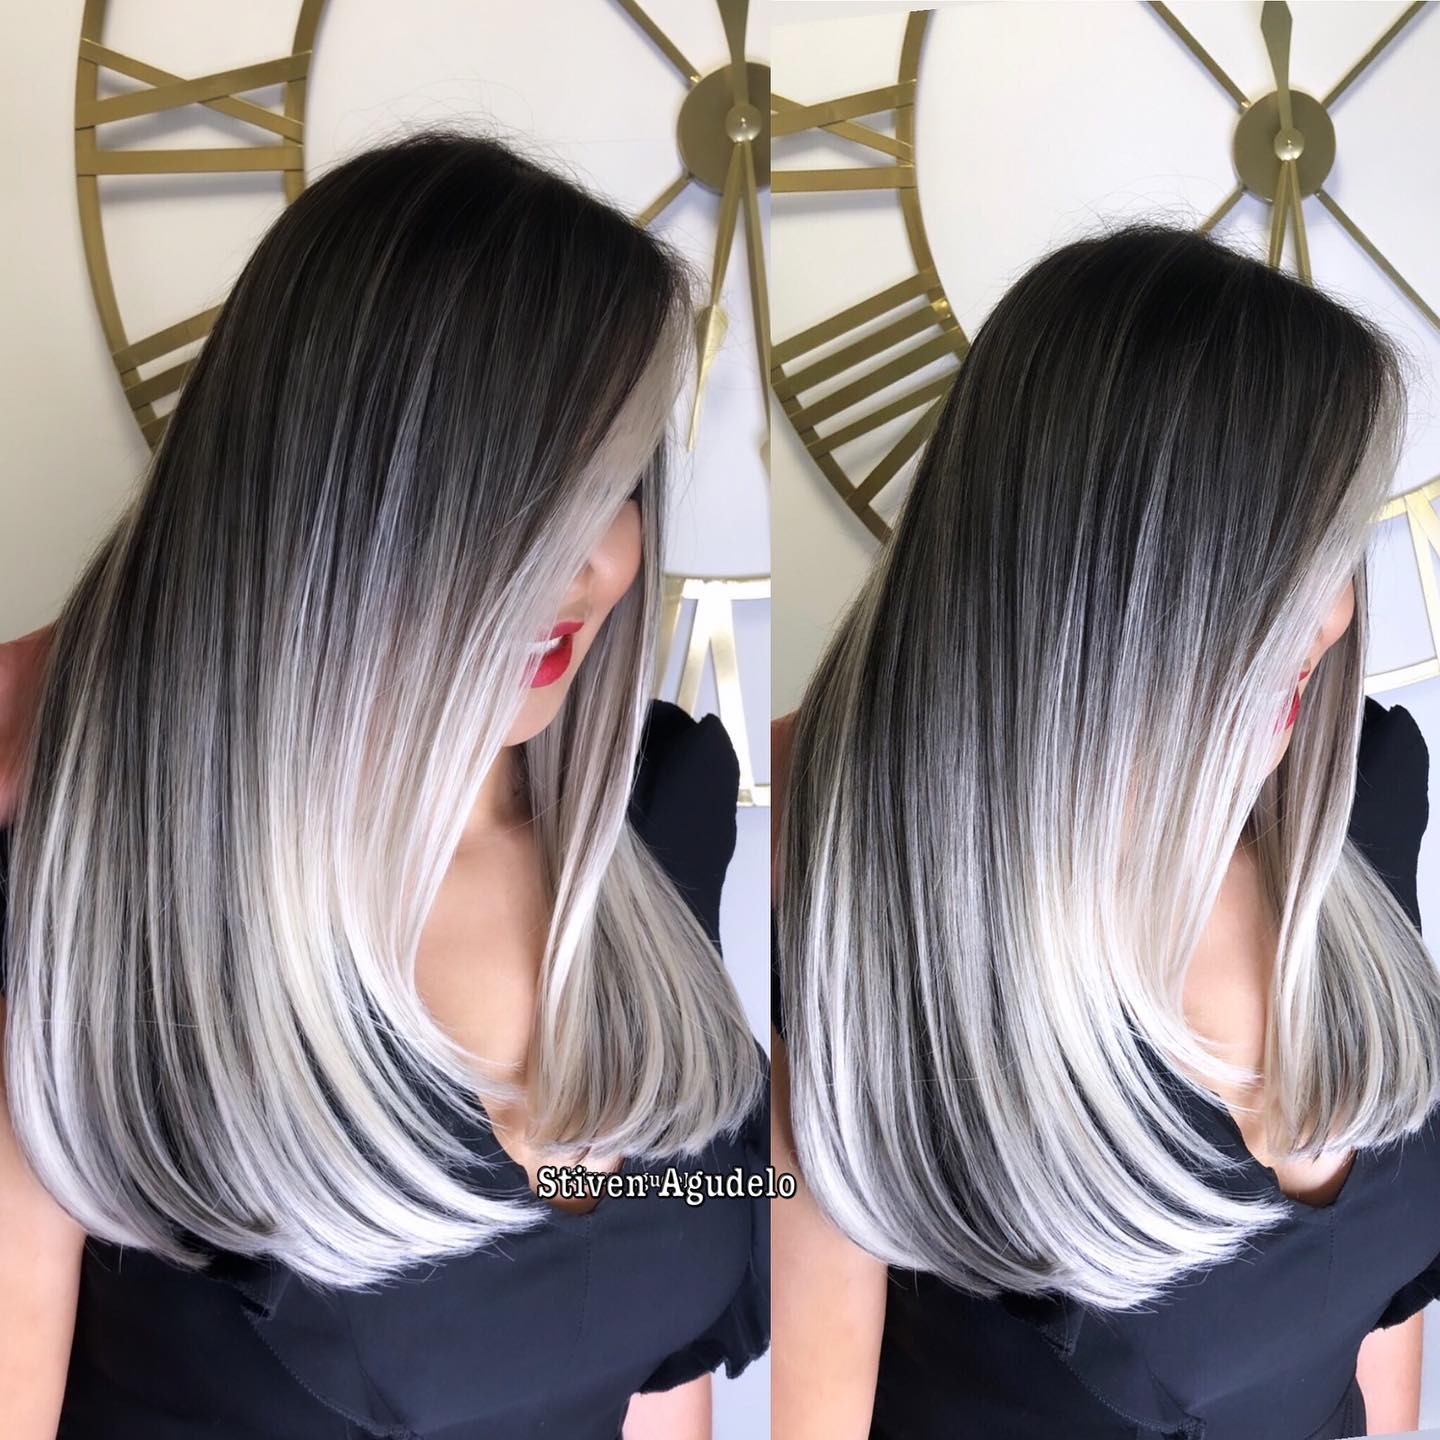 Long Straight Ash Hair Color with Dark Roots